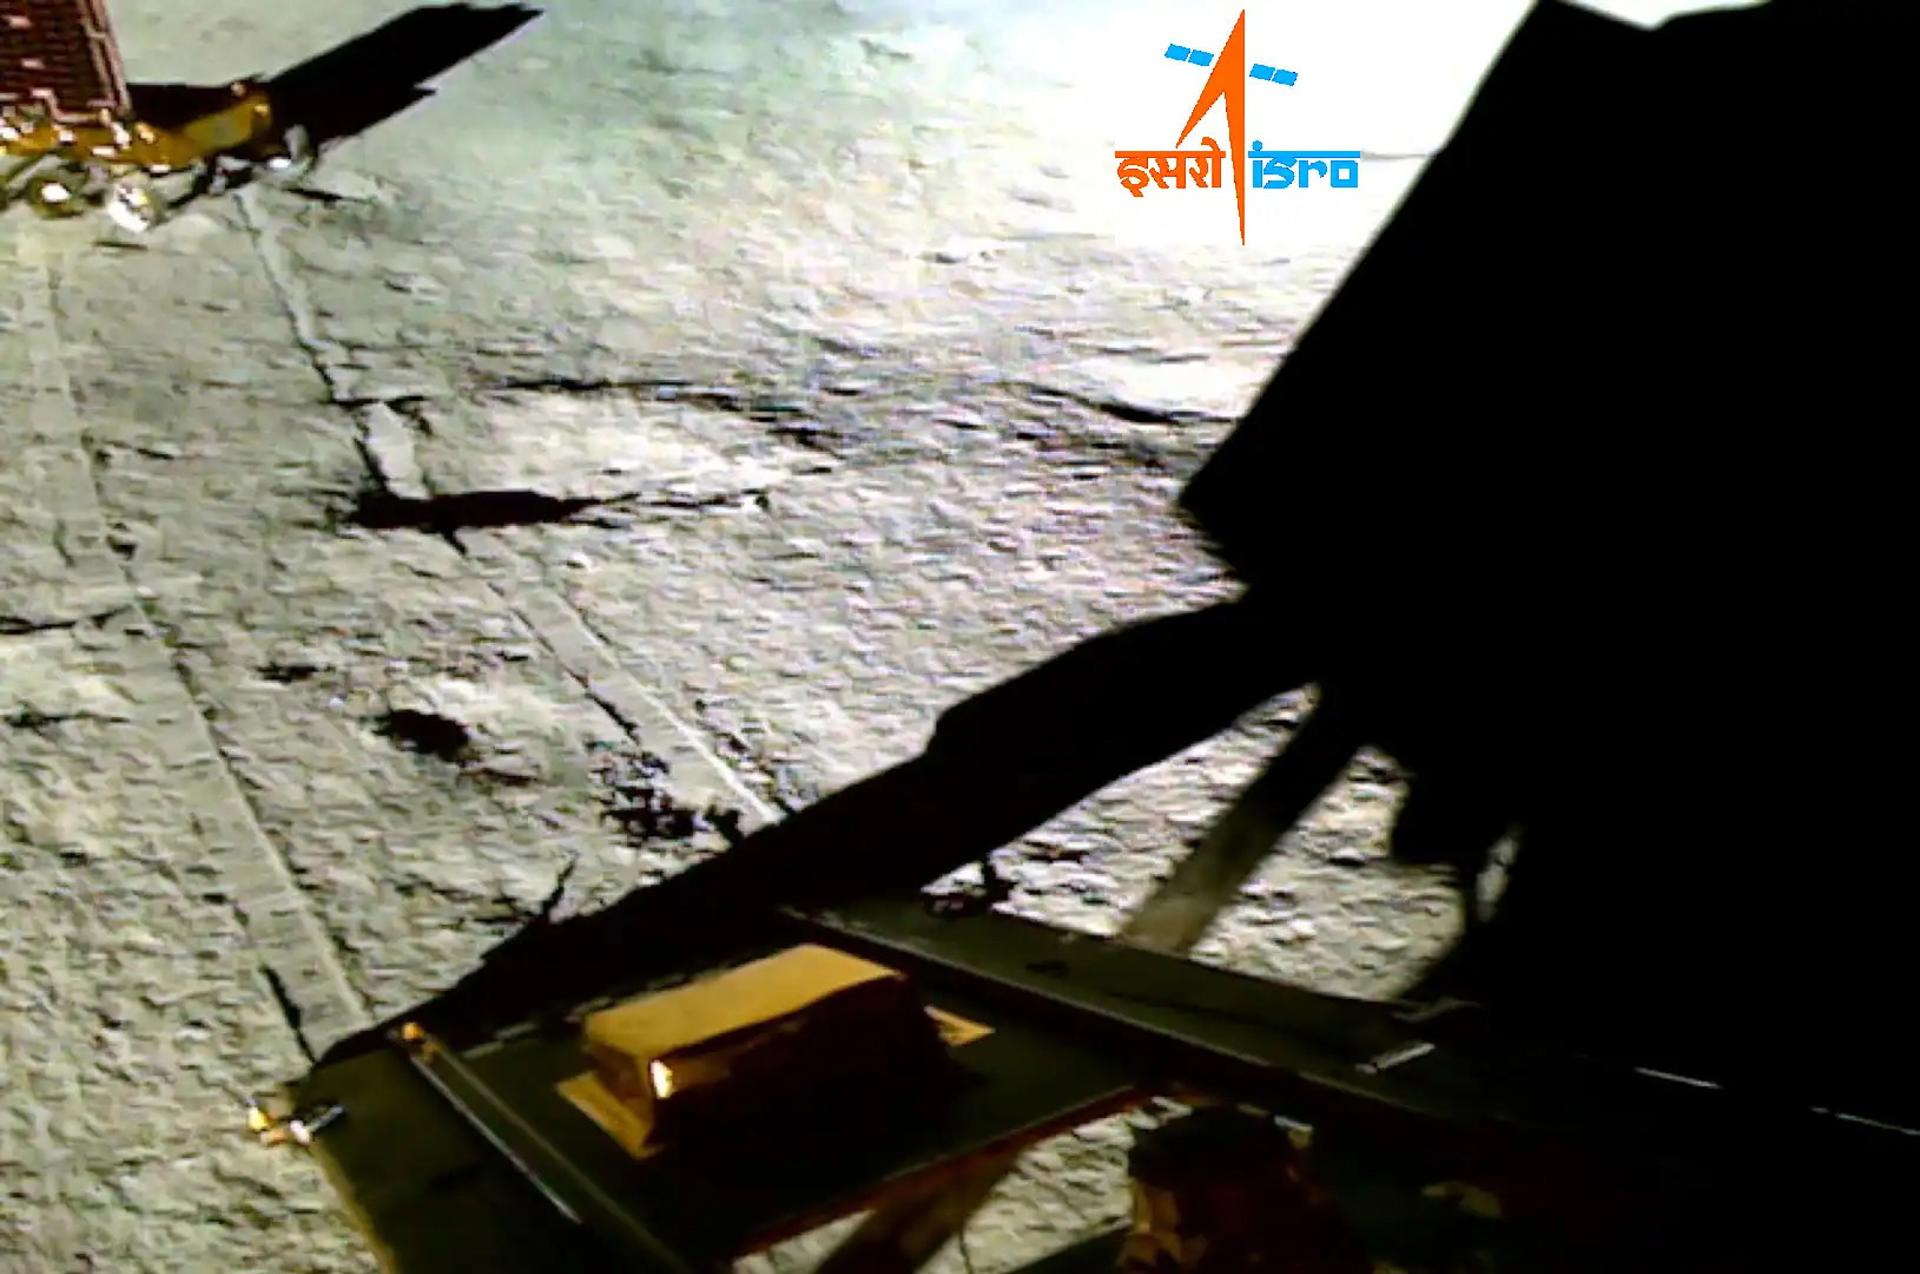 A handout photo made available on 29 August 2023 by the Indian Space Research Organisation (ISRO) shows the Rover of India's Chandrayaan-3 lunar mission retracing its path and safely heading in a new direction, on the Moon. EFE/EPA/FILE/ISRO HANDOUT BEST QUALITY AVAILABLE HANDOUT EDITORIAL USE ONLY/NO SALES